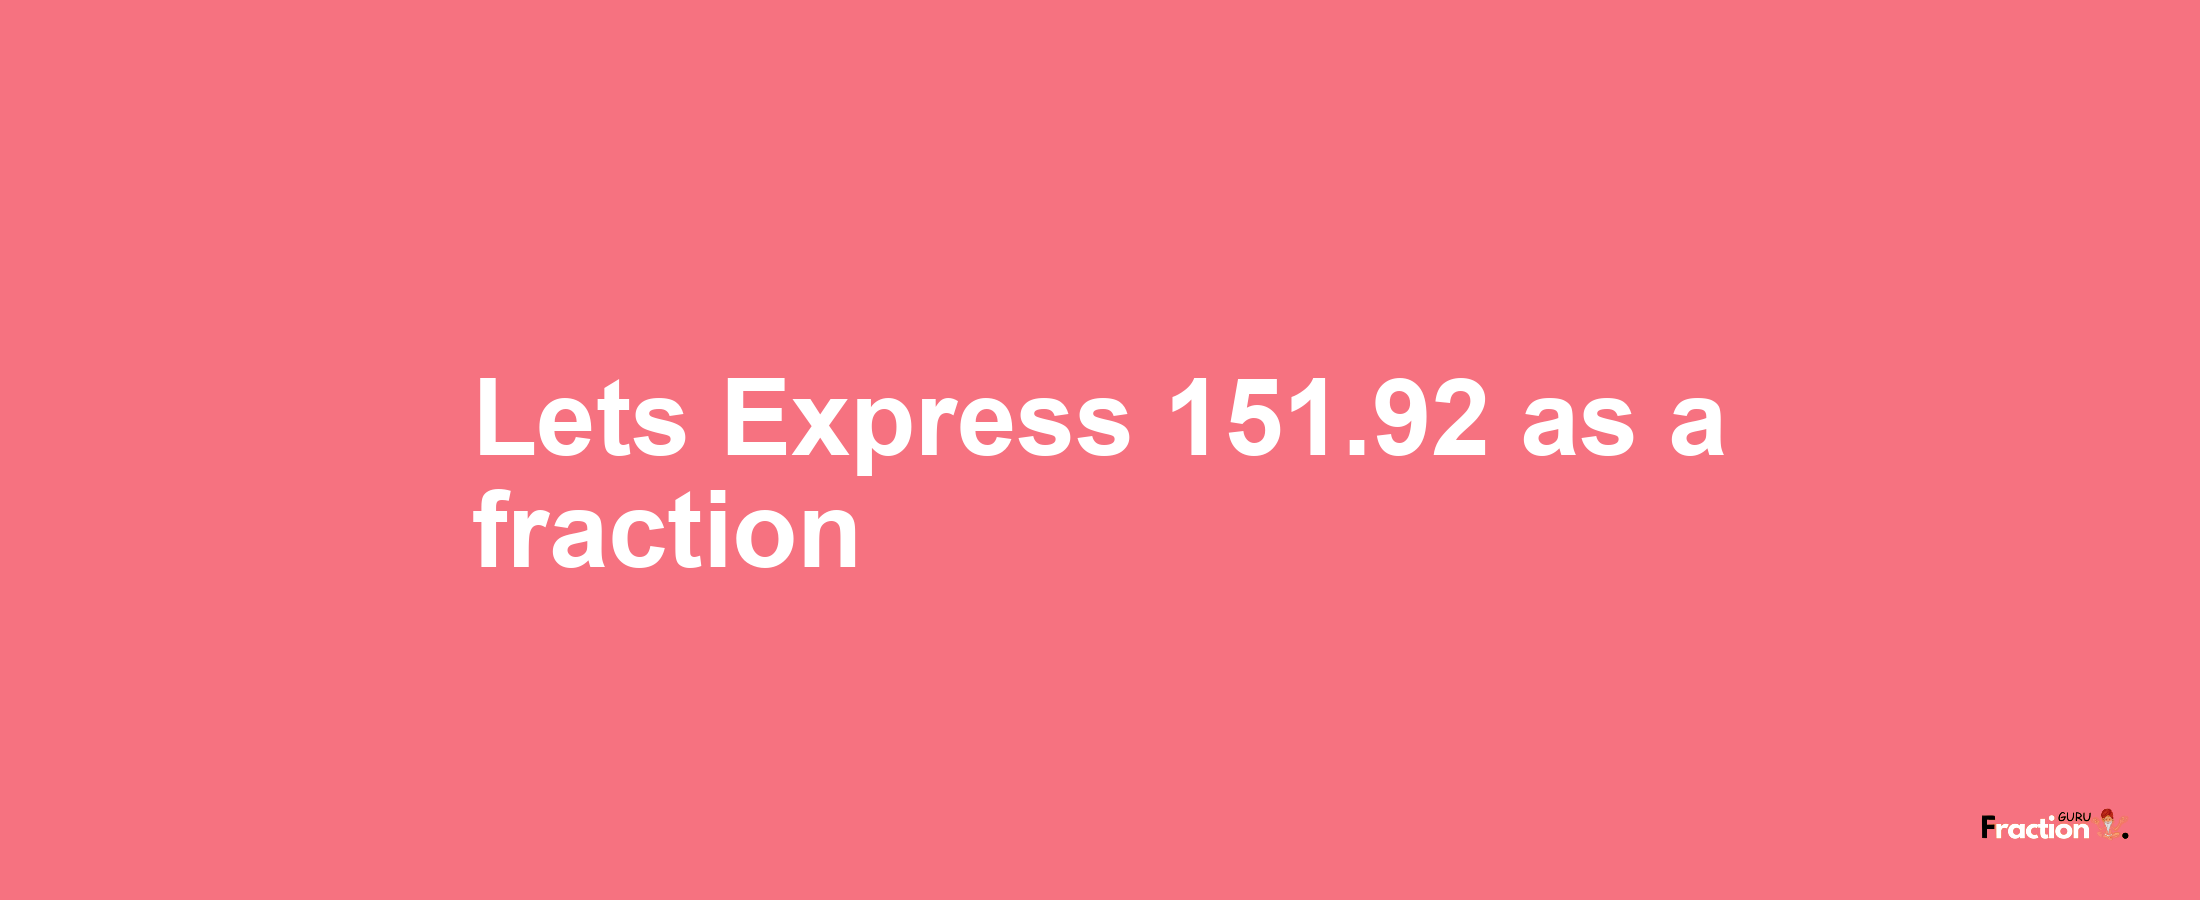 Lets Express 151.92 as afraction